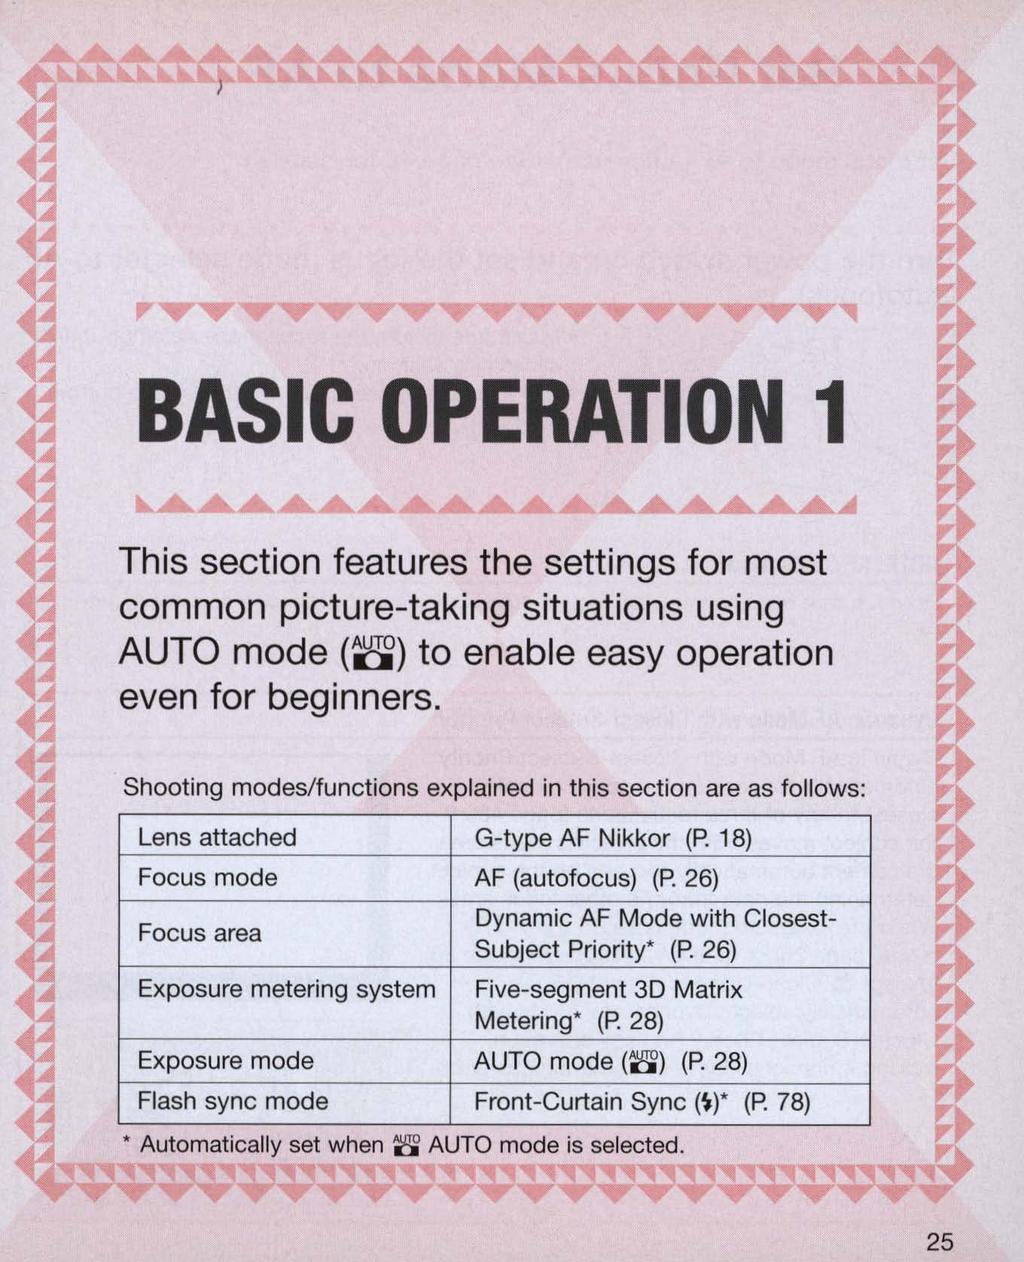 BASIC OPERATION 1 This section features the settings for most common picture-taking situations using AUTO mode (8) to enable easy operation even for beginners.